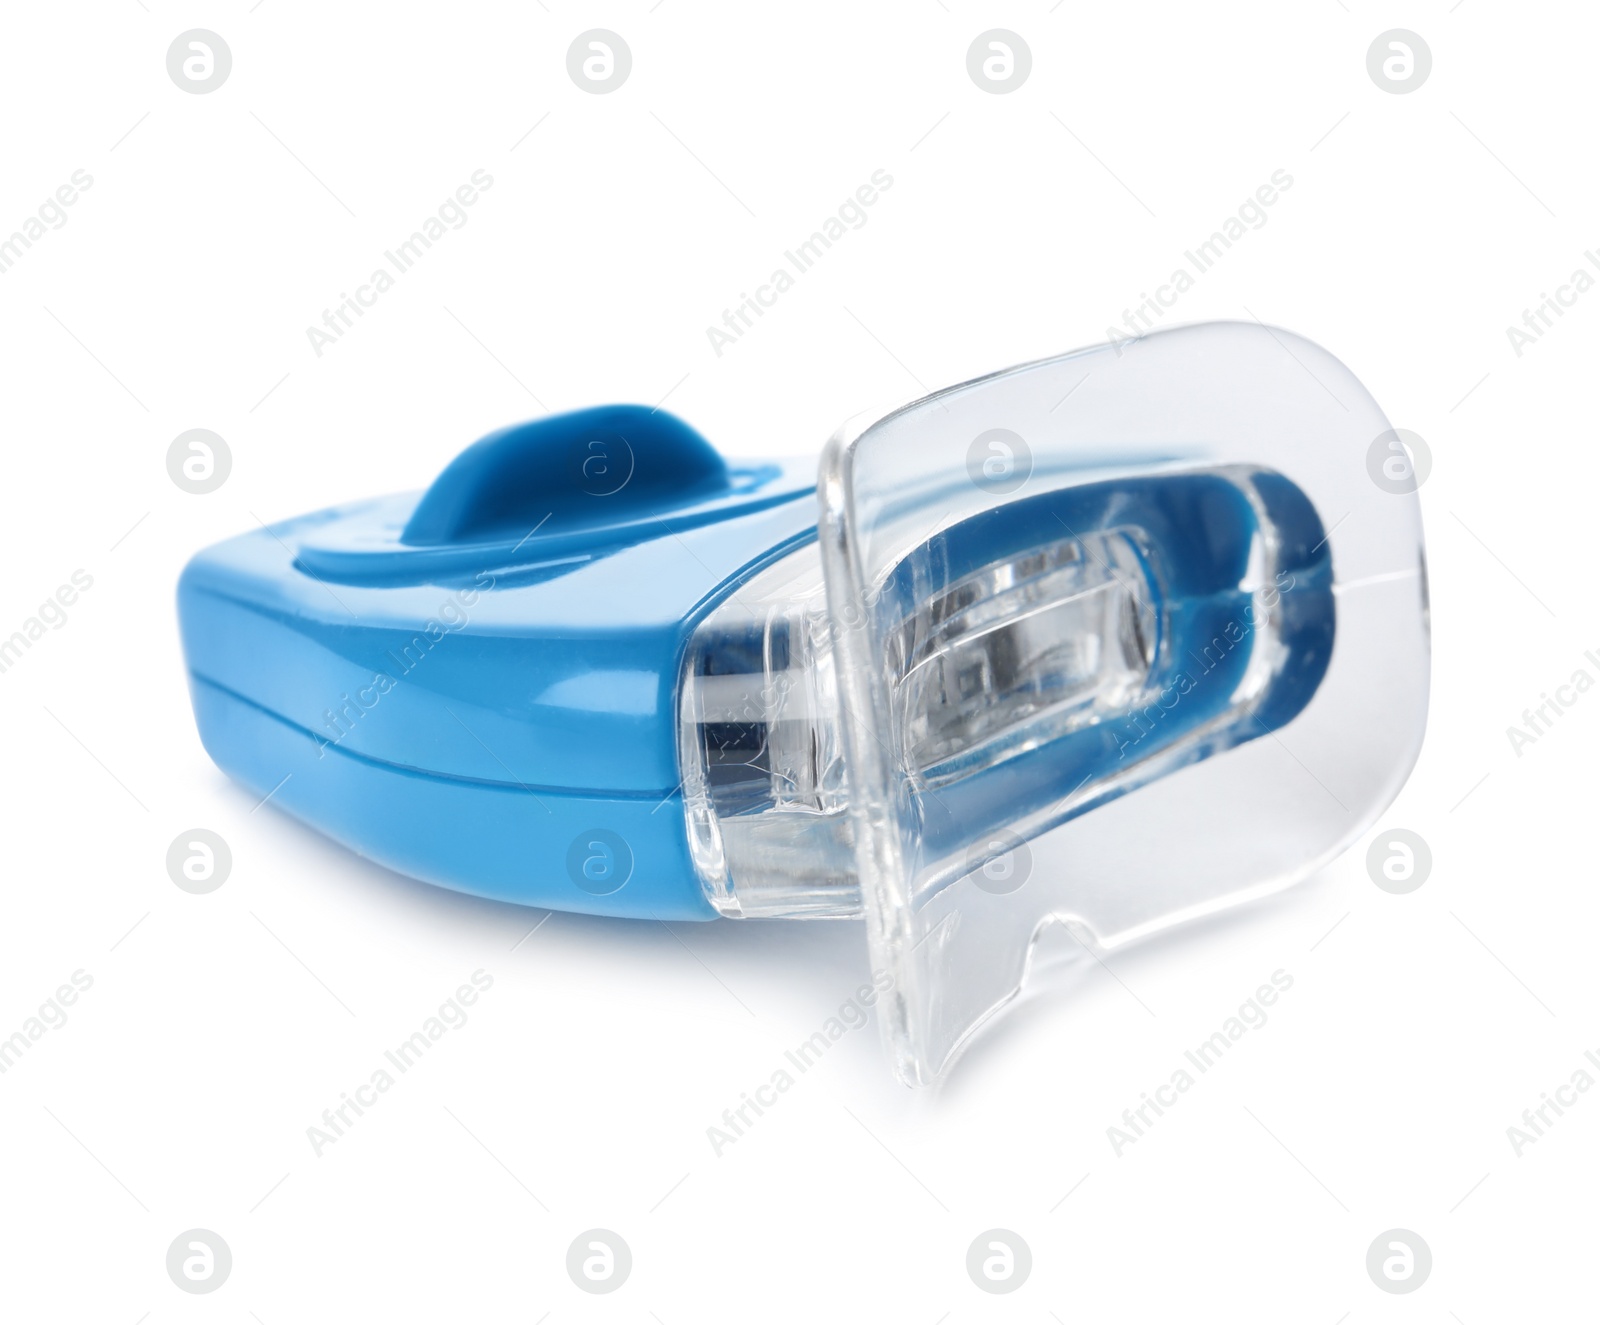 Photo of Tooth whitening device on white background. Dental care